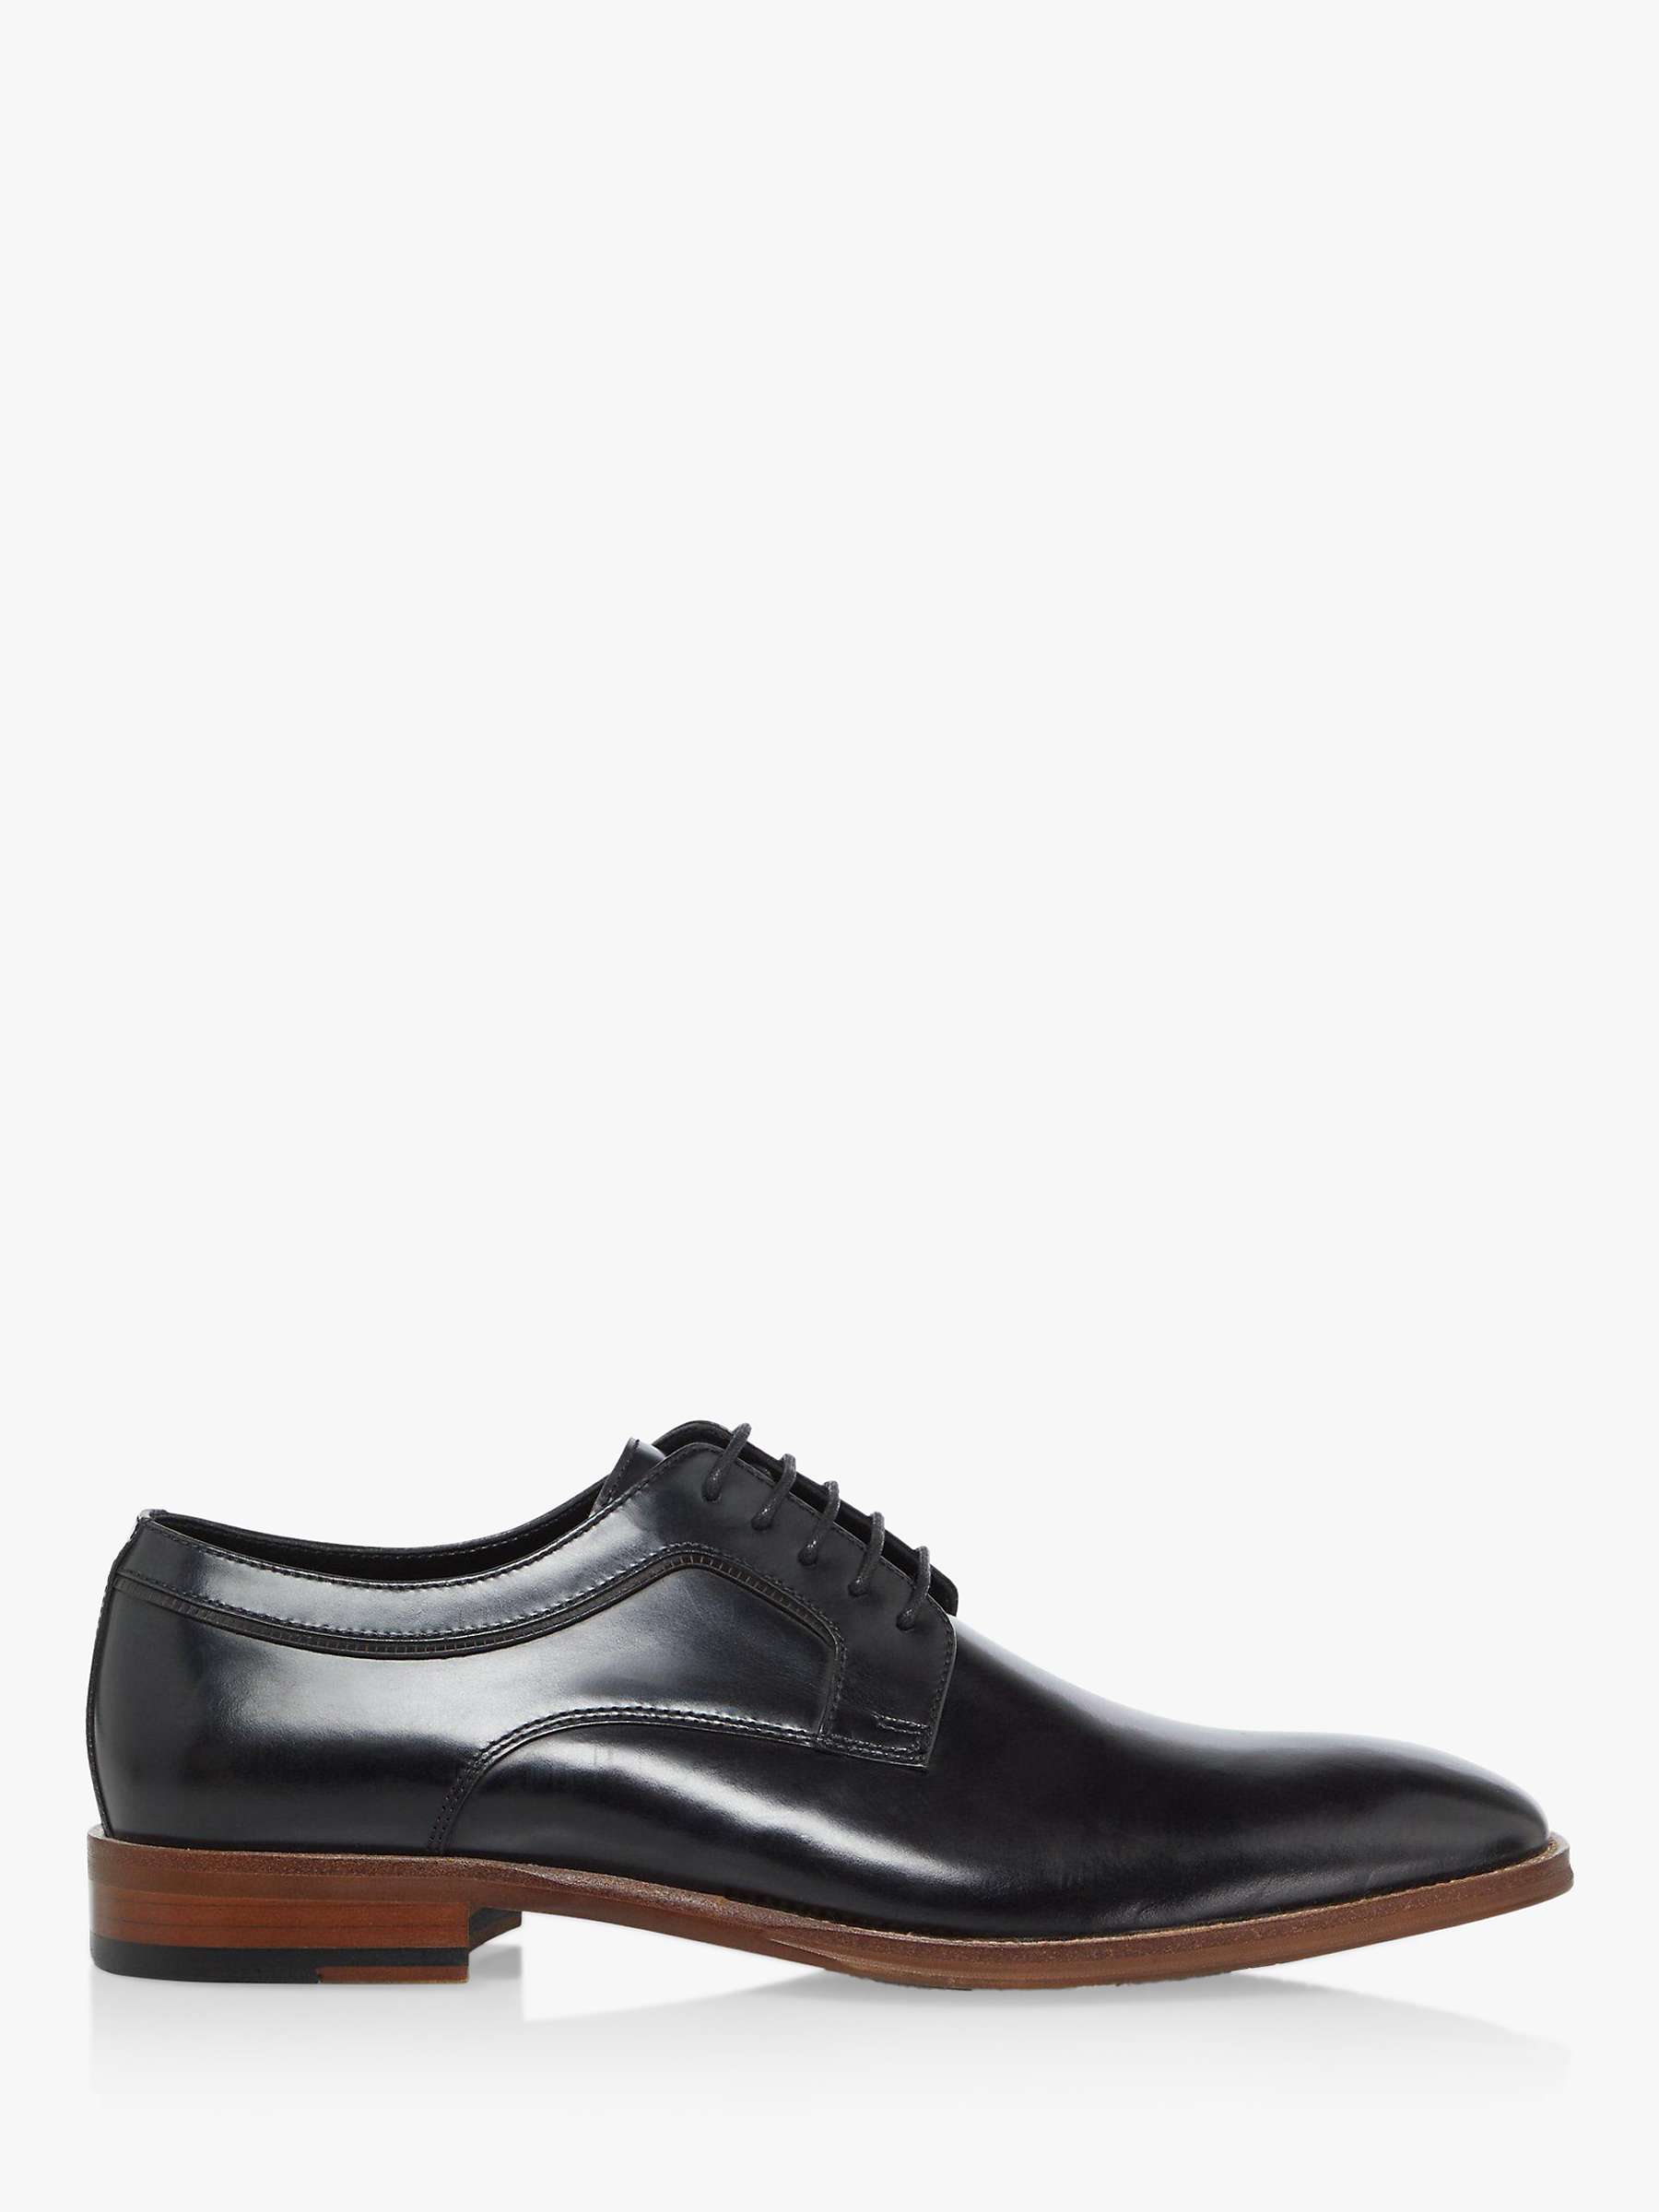 Buy Dune Sparrows Leather Gibson Shoes Online at johnlewis.com